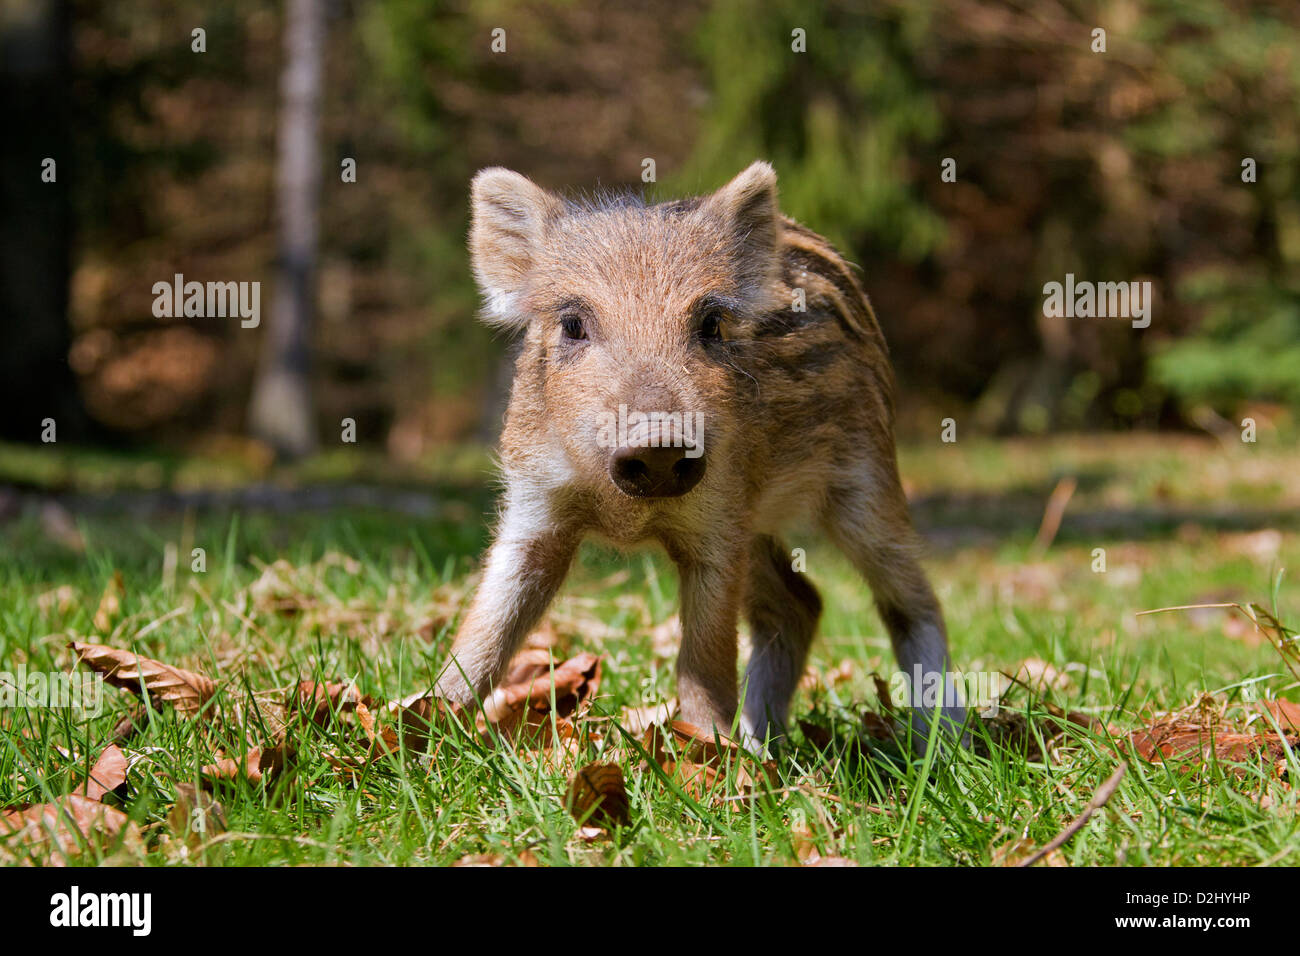 Wild boar (Sus scrofa) piglet showing striped coat in forest in spring, Germany Stock Photo